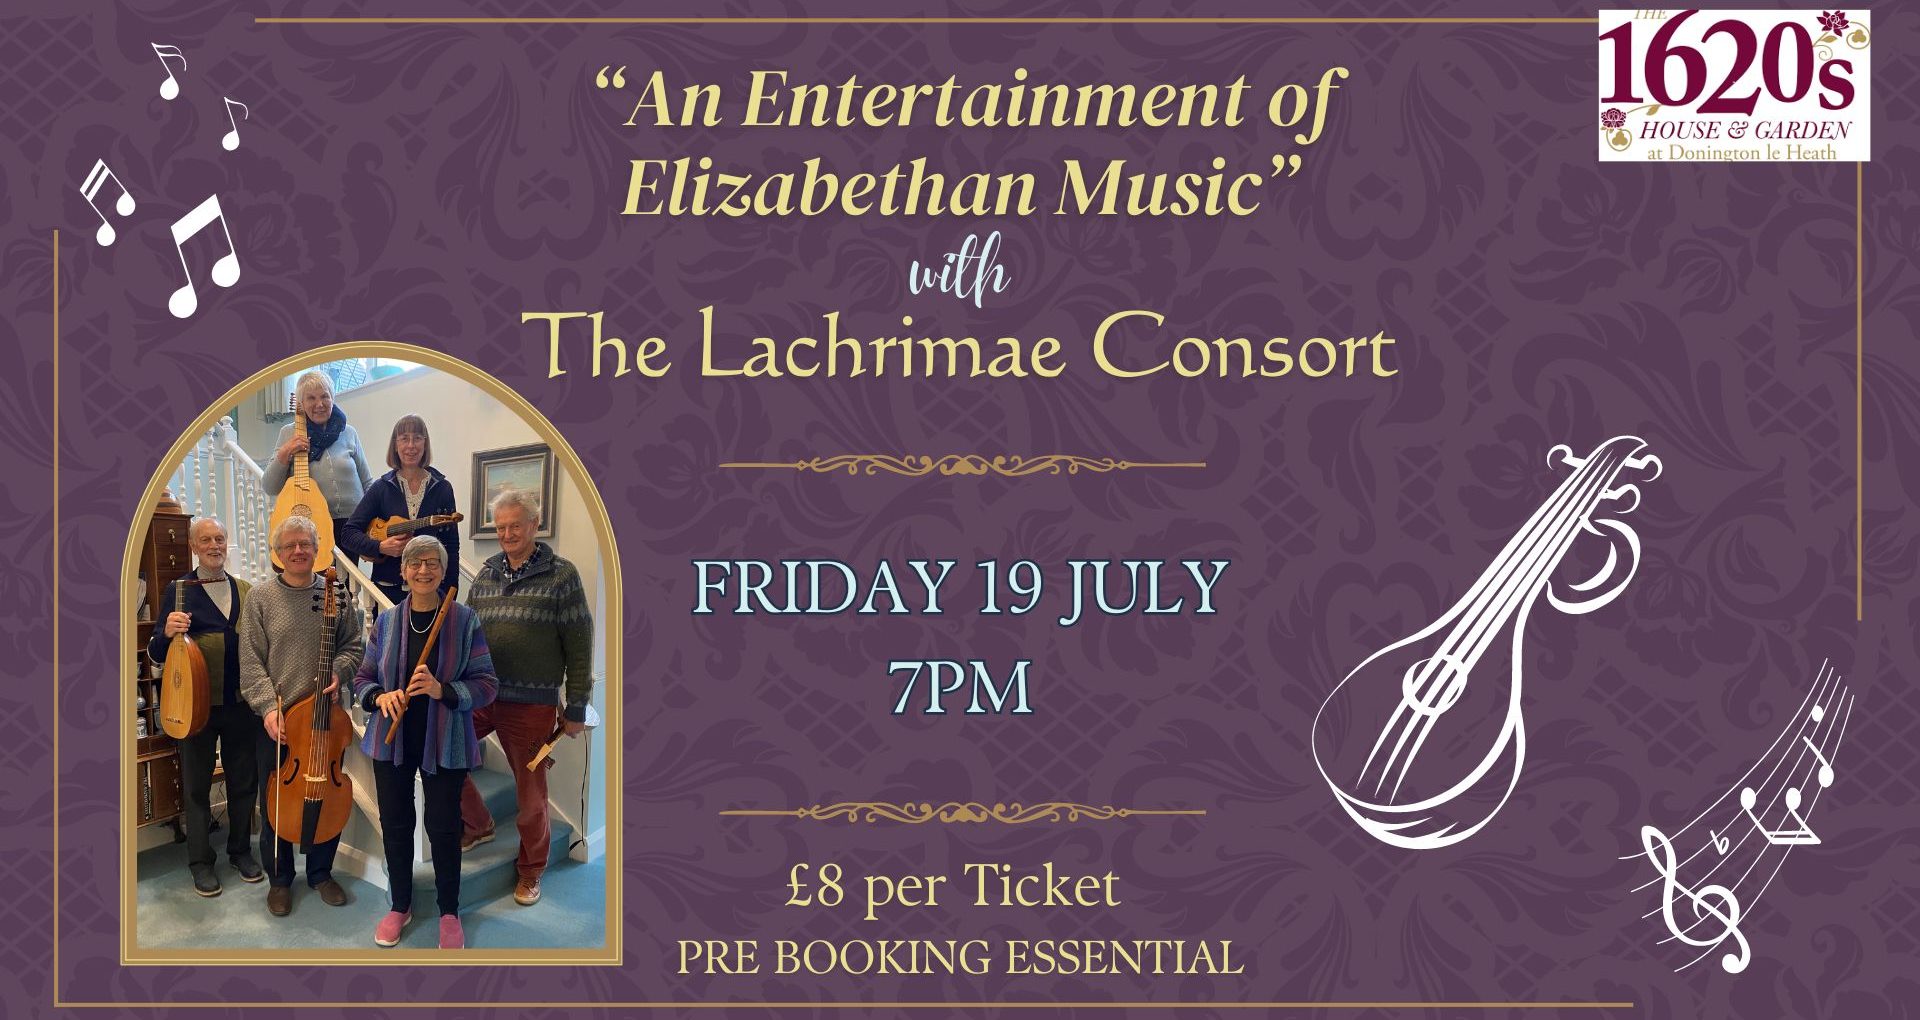 The Lachrimae Consort - An Entertainment of Elizabethan Music